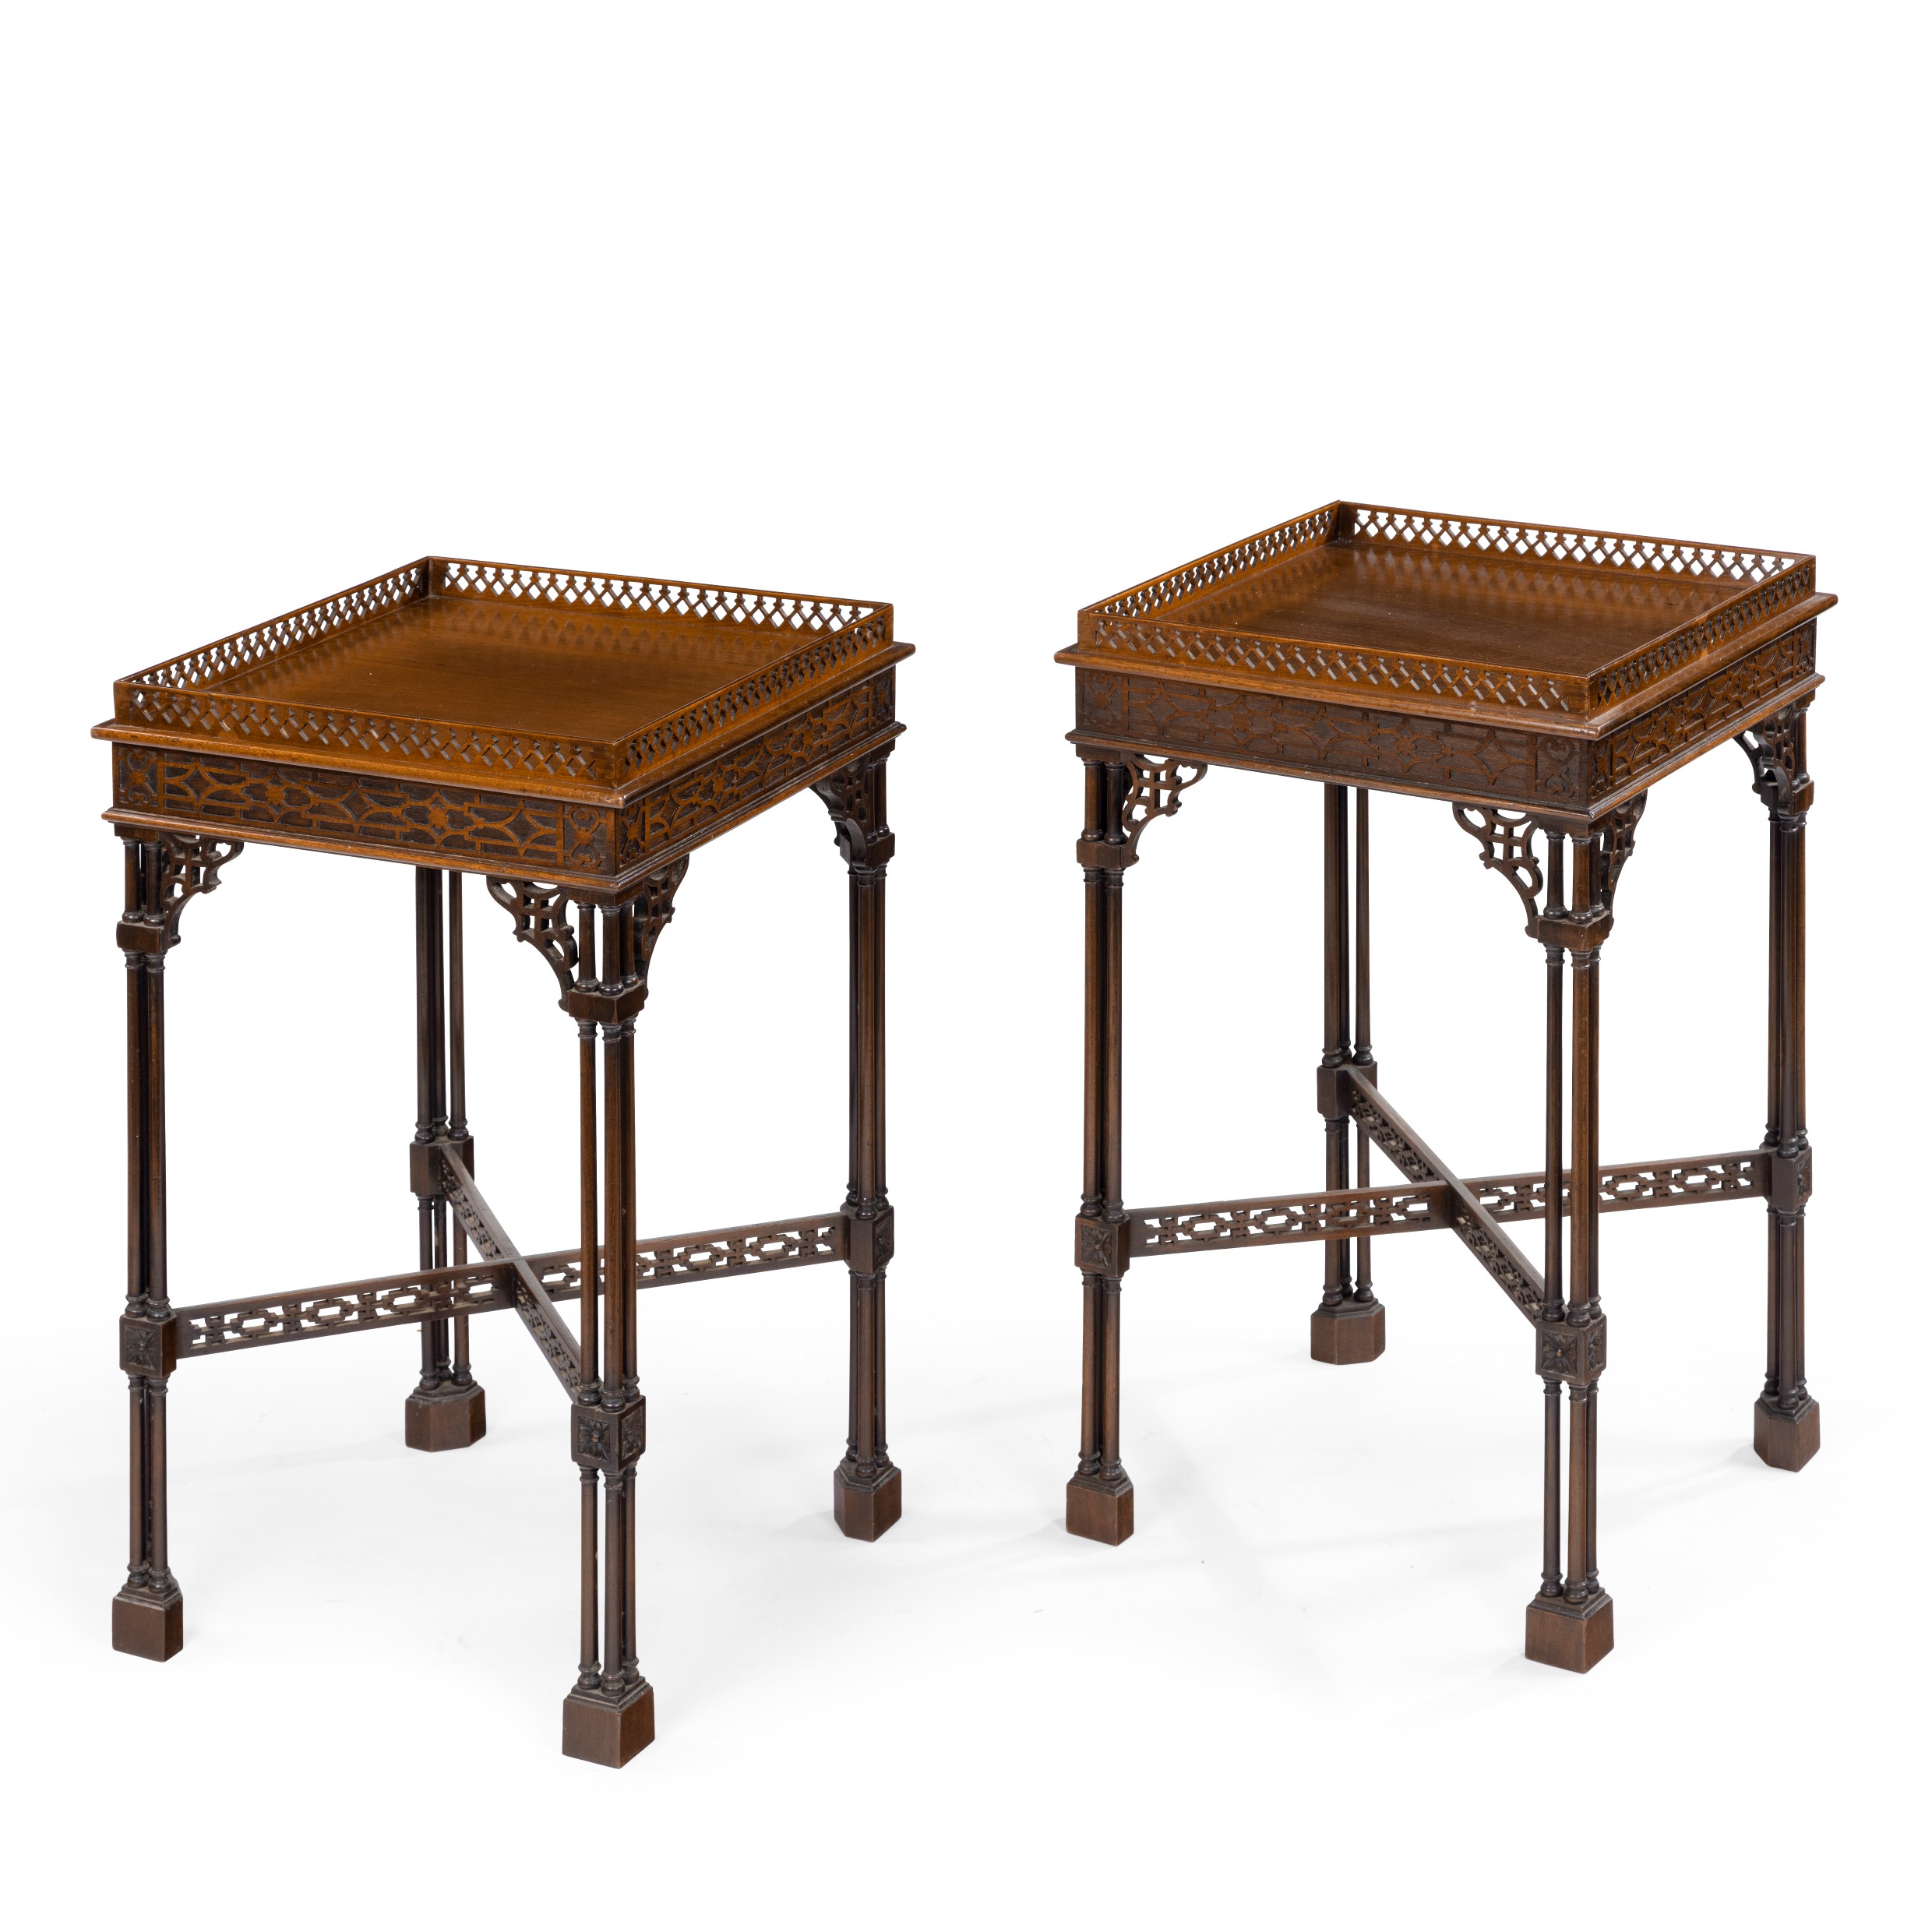 A pair of mahogany side tables in the Chippendale style